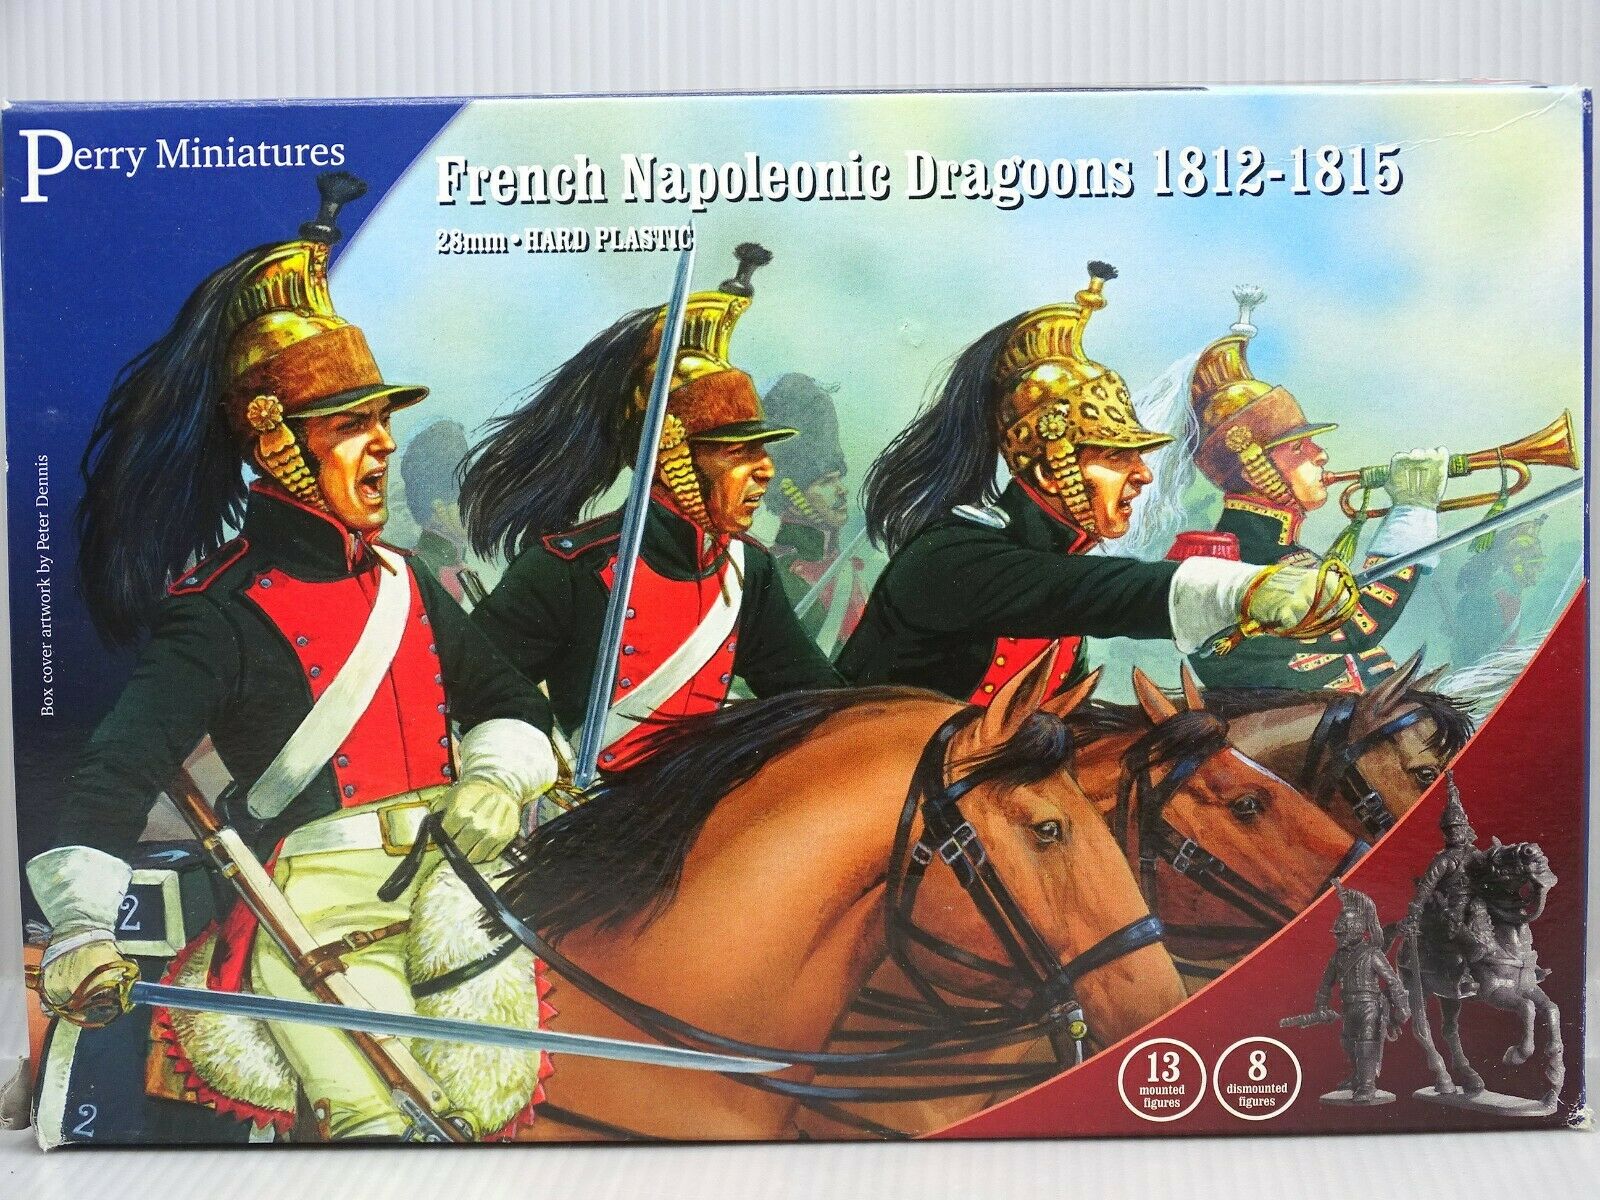 Perry Miniatures | French Napoleonic Dragoons | 1812-1815